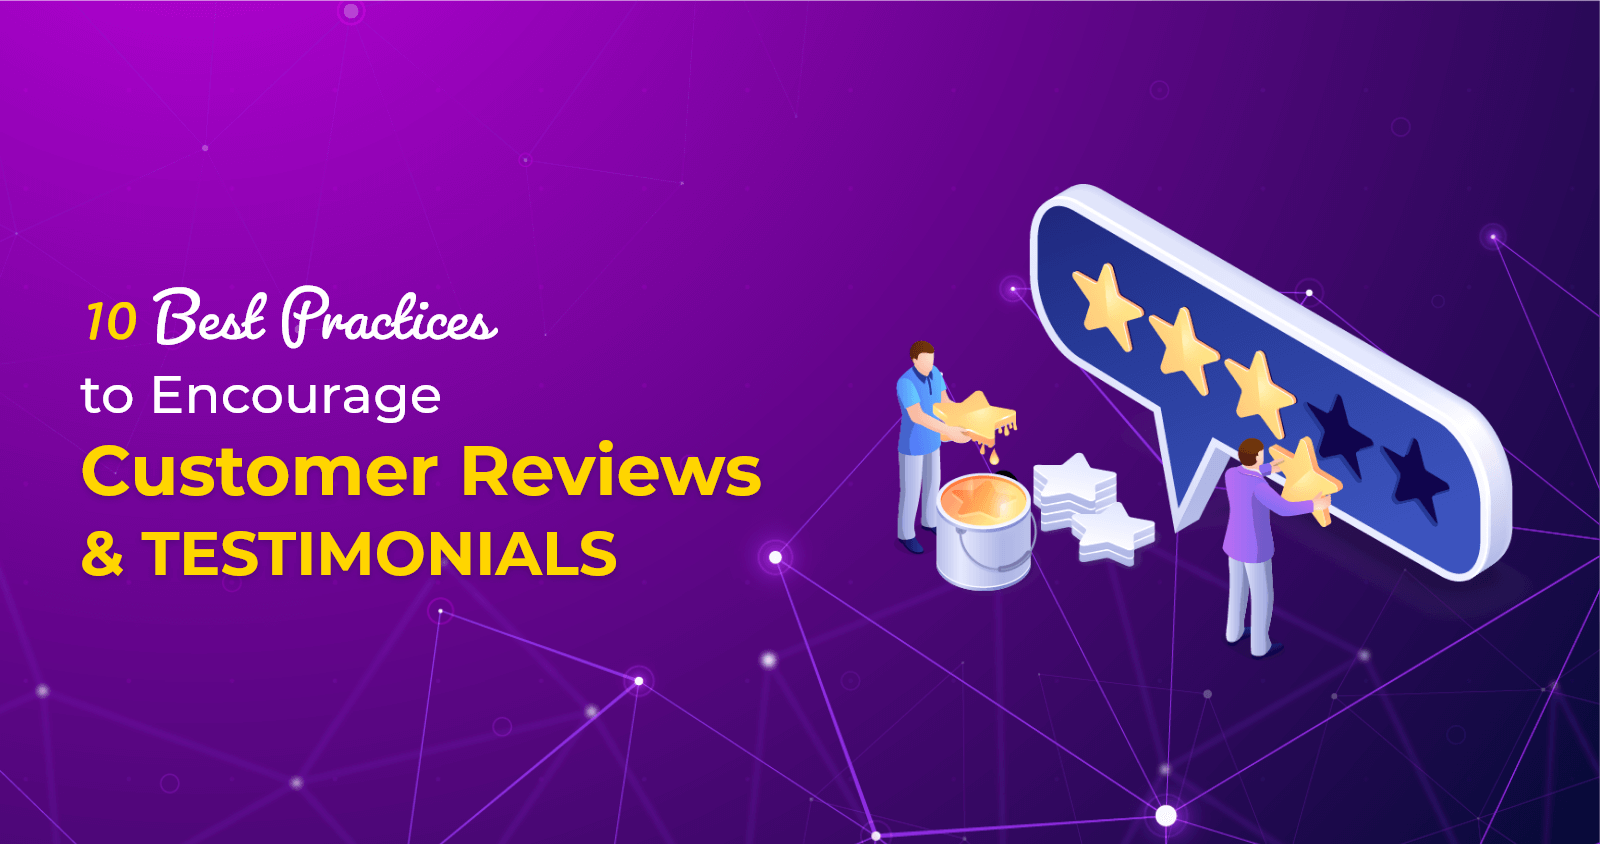 10 Best Practices to Encourage Customer Reviews & Testimonials